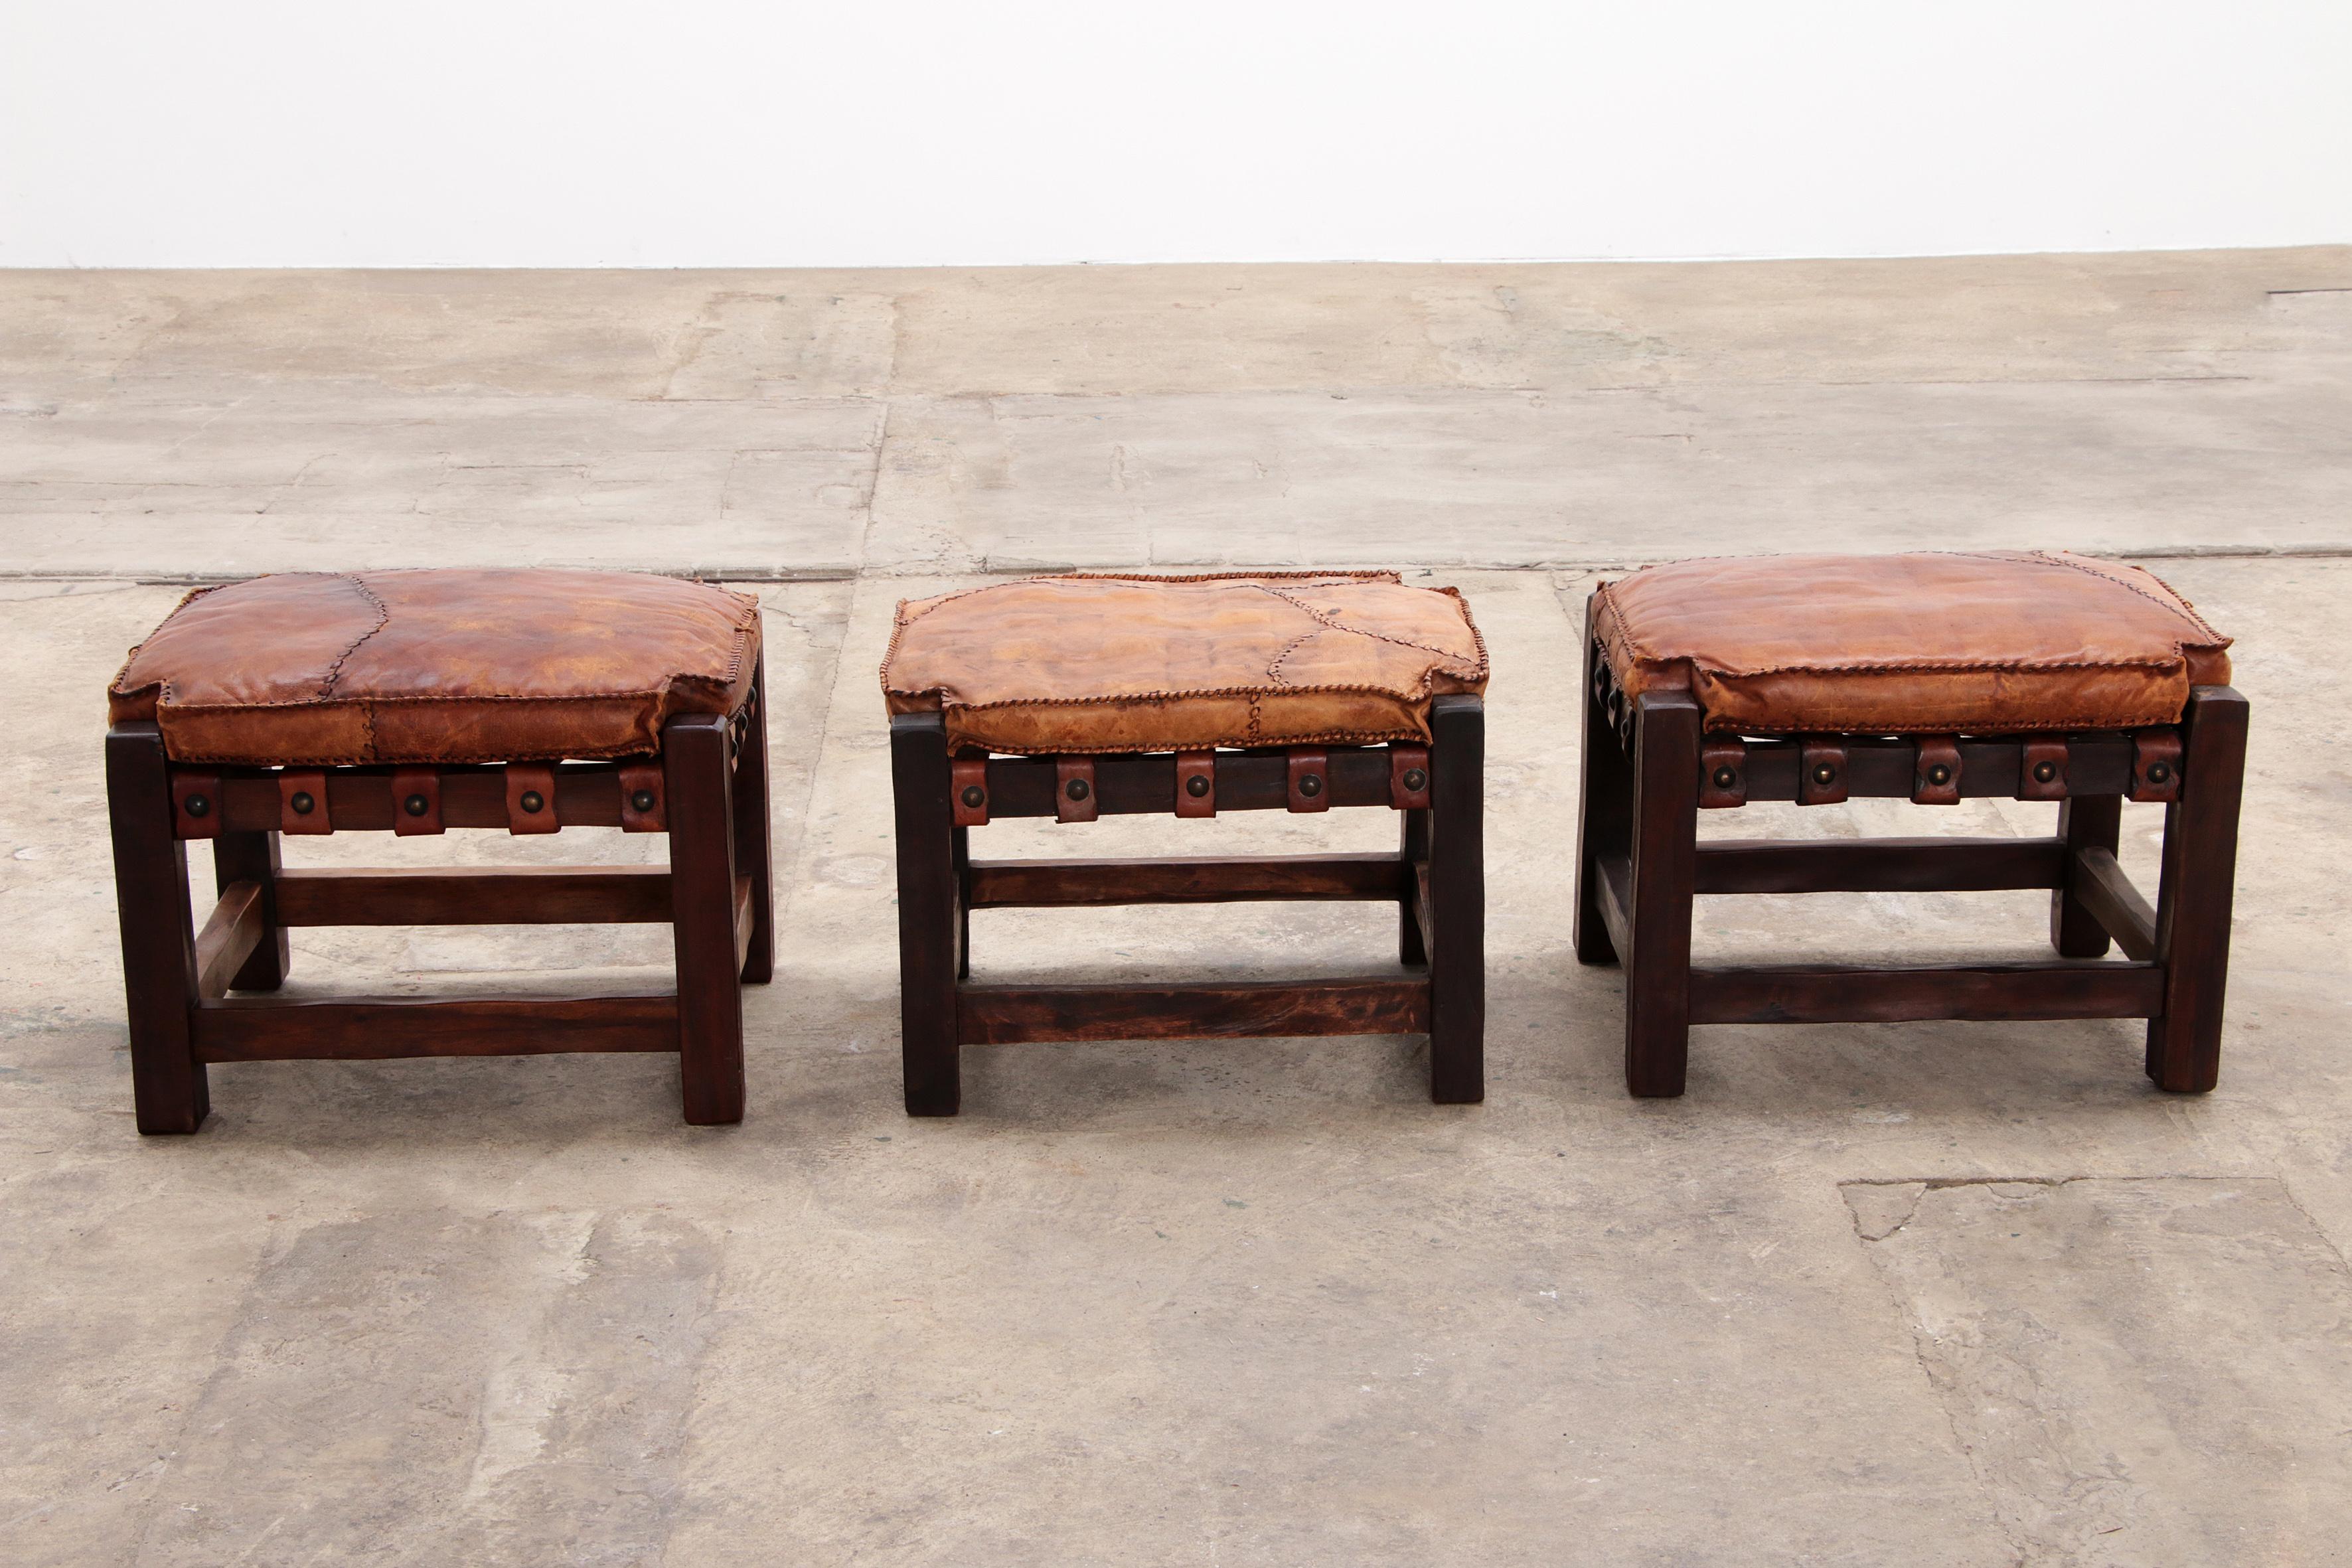 Brazilian Brutalist footstools with patchwork leather, 1960 For Sale 1